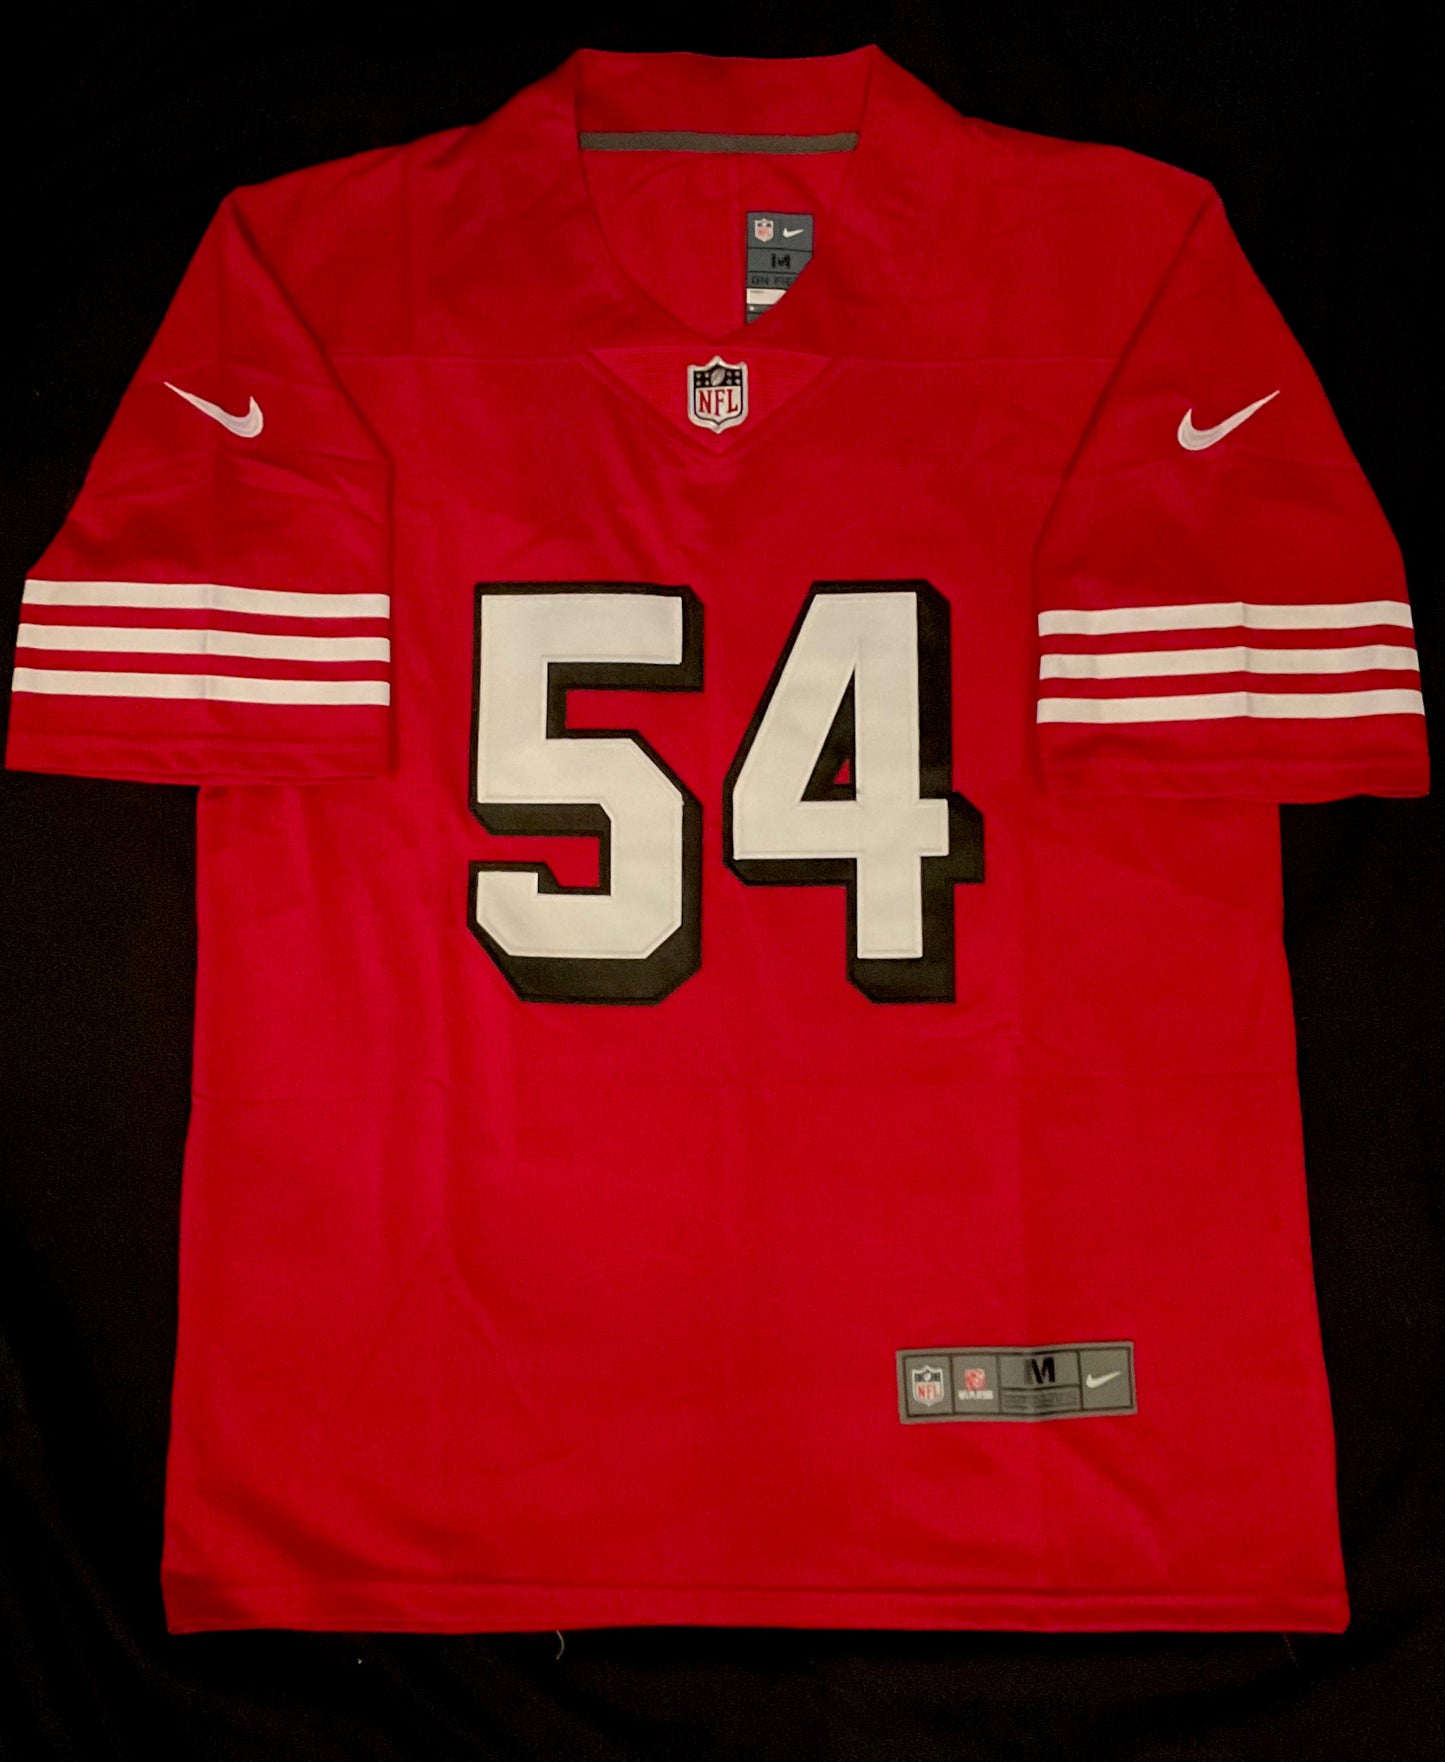 #54 WARNER San Francisco 49ers Home Throwback Style Jersey